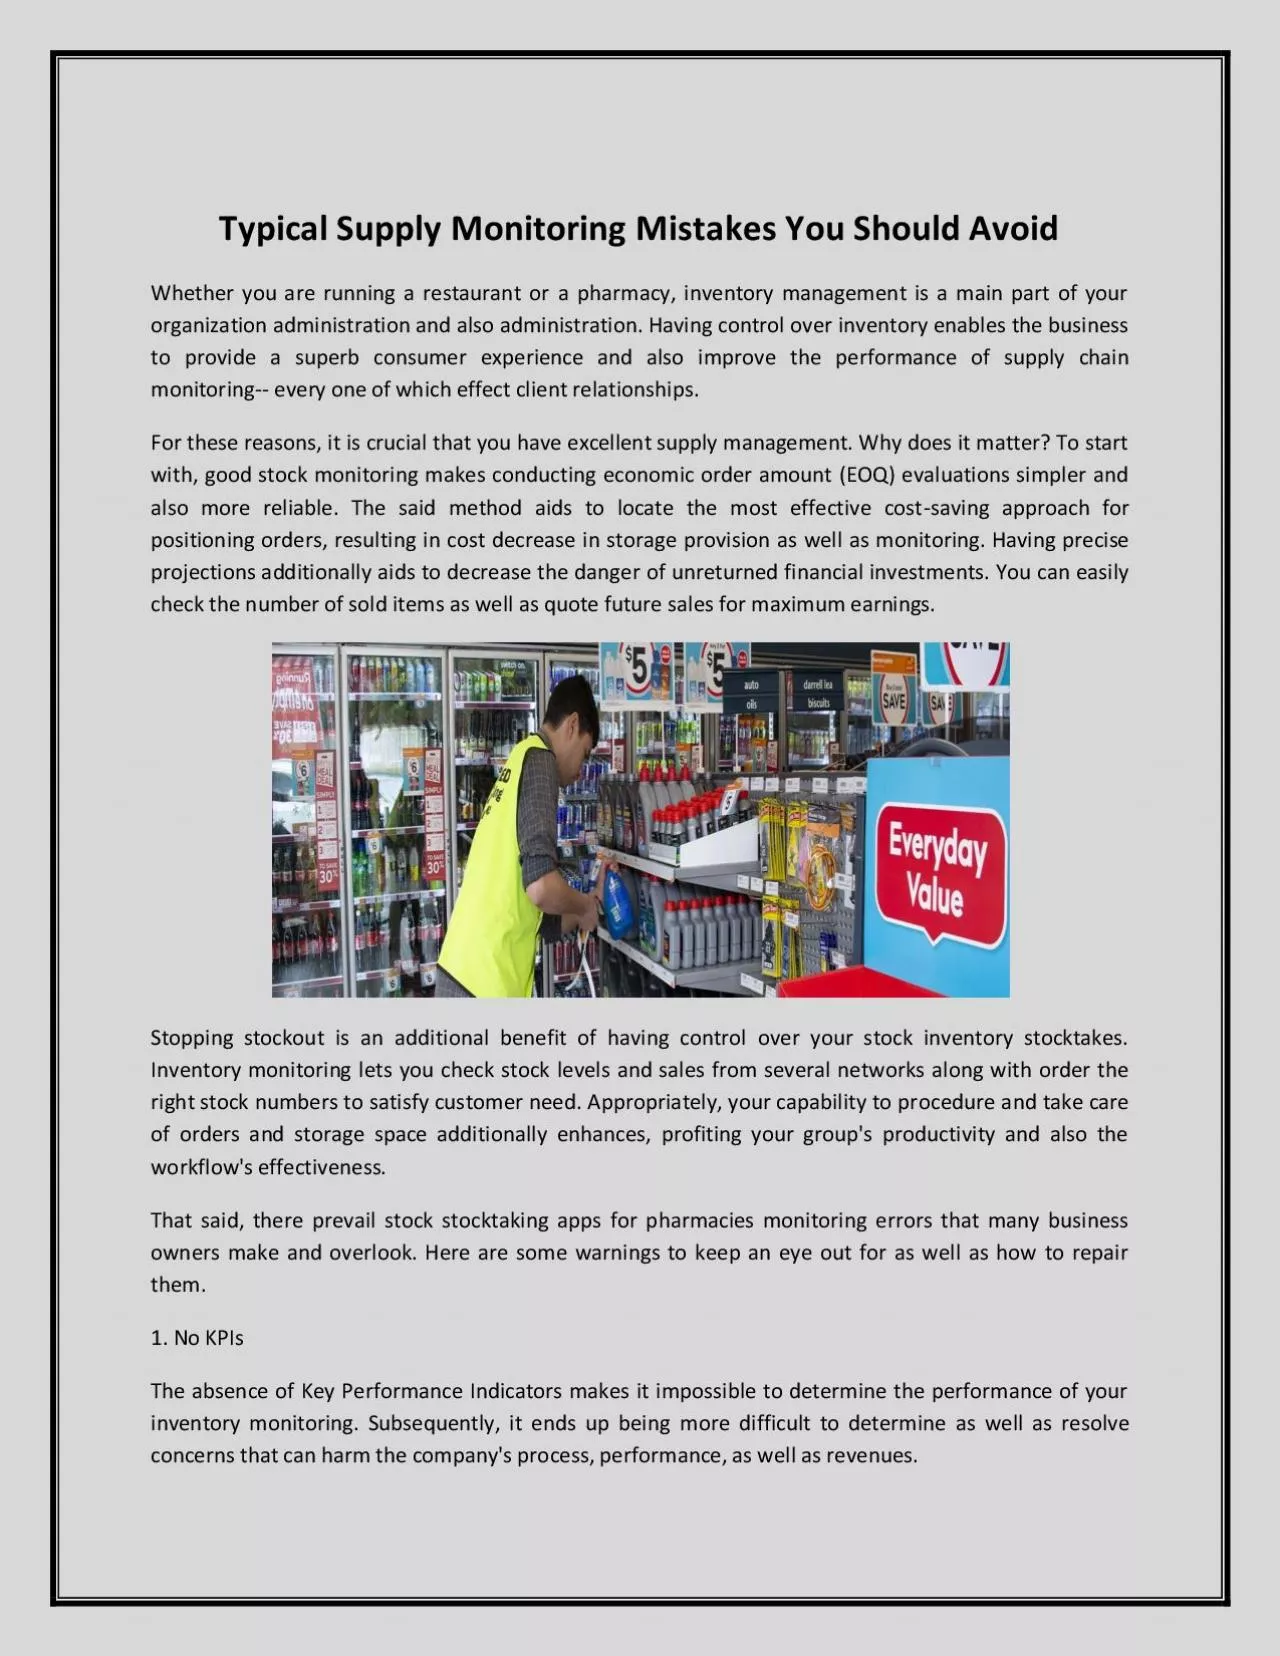 Typical Supply Monitoring Mistakes You Should Avoid